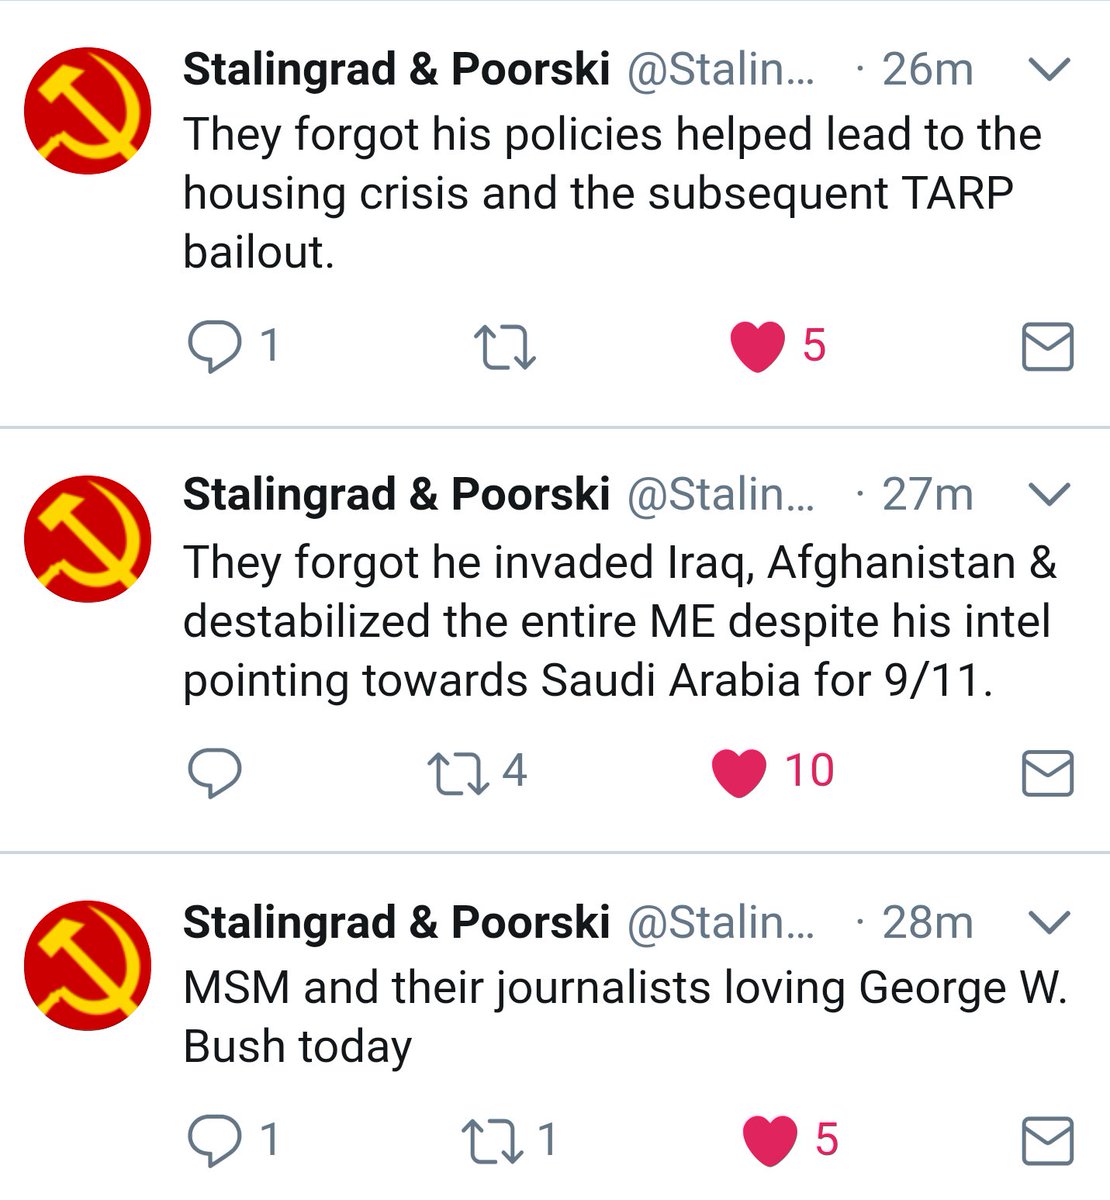 Good points  @Stalingrad_Poor People forget just how awful the Bush Administration was.